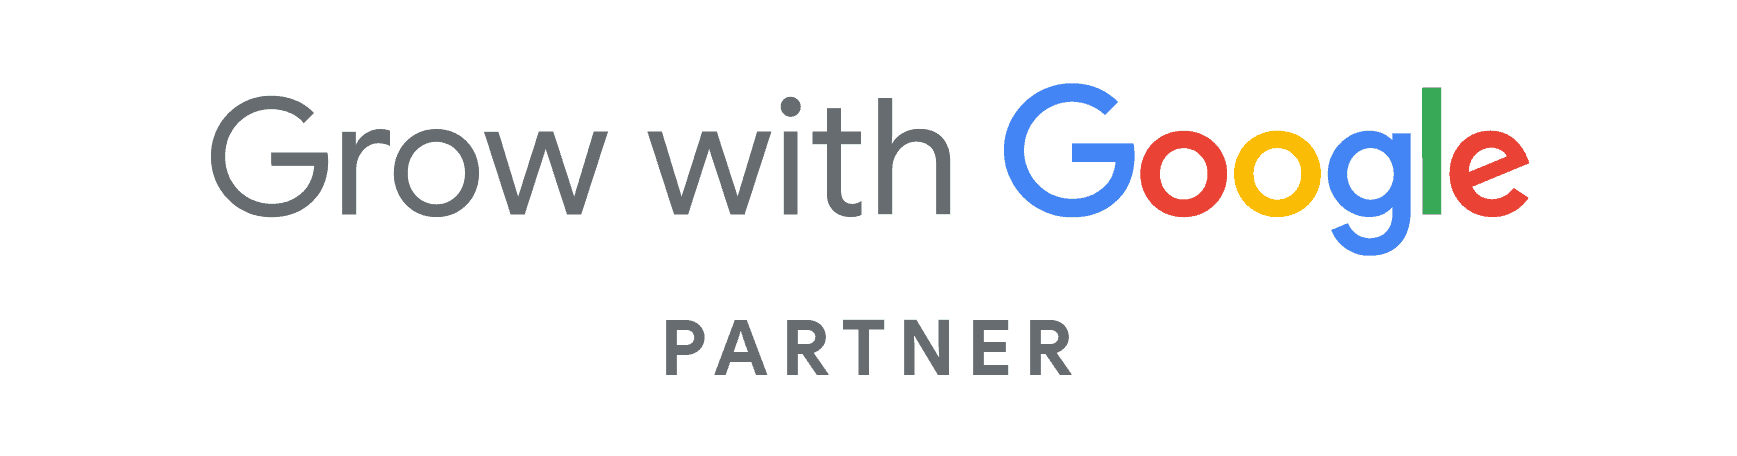 Juuga Marketing is Proud Member of Grow with Google